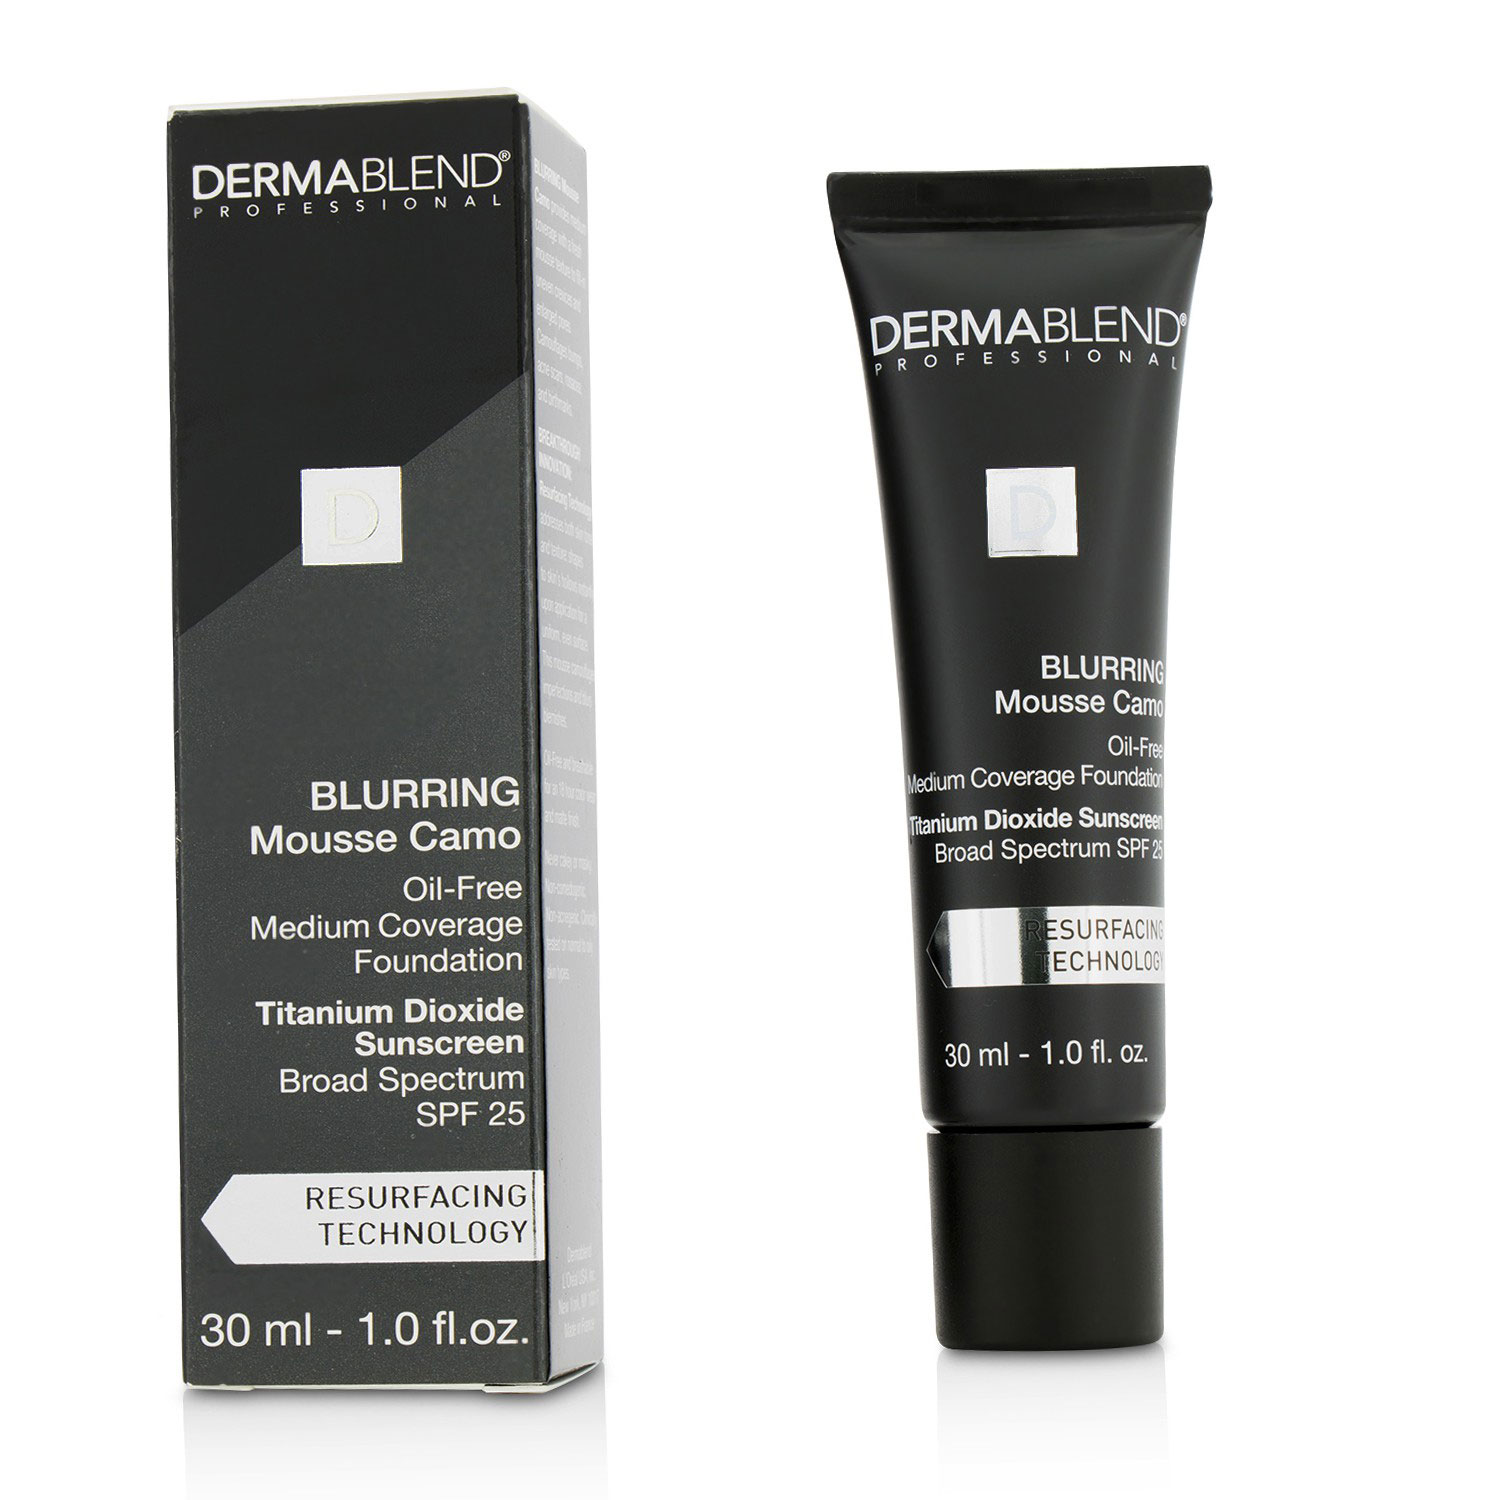 Blurring Mousee Camo Oil Free Foundation SPF 25 (Medium Coverage) - #0C Ivory Dermablend Image